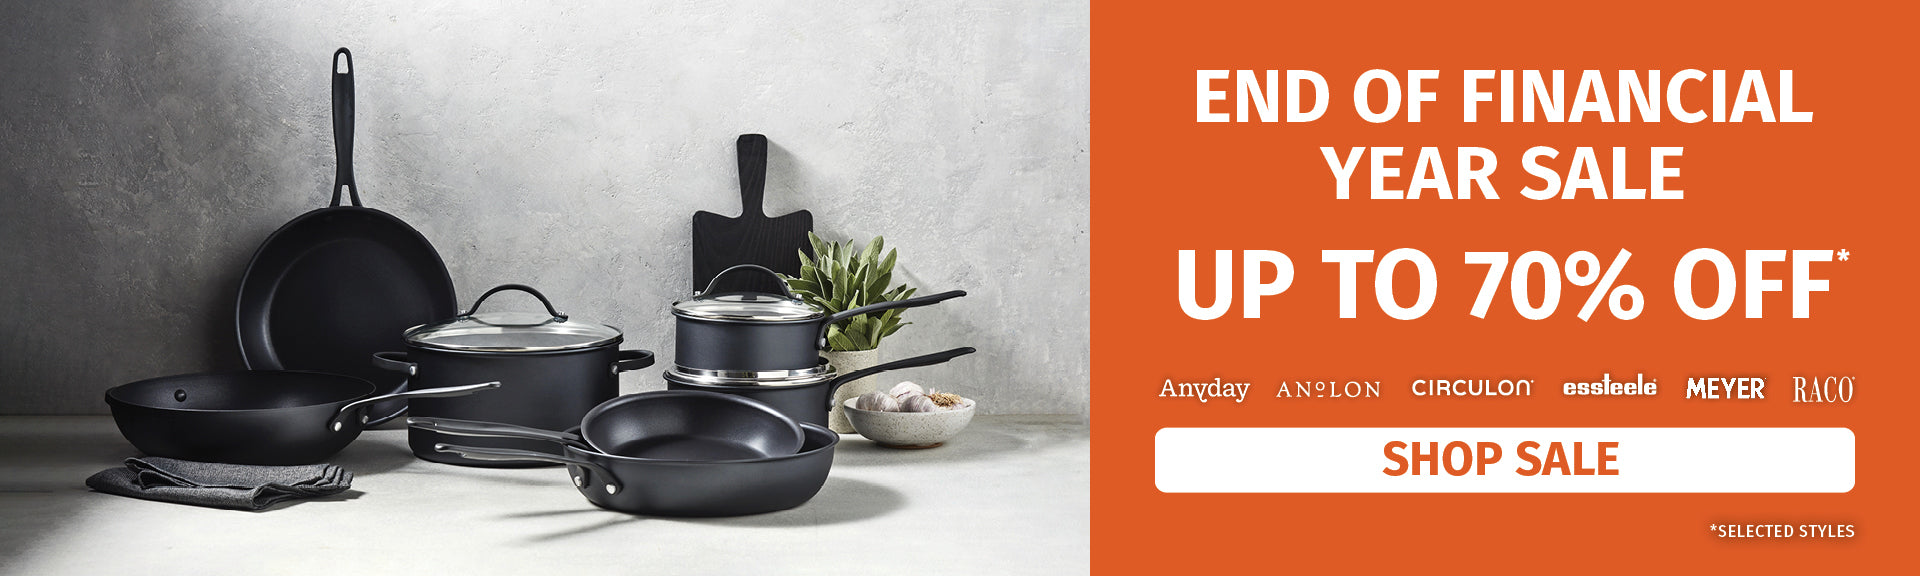 EOFY SALE |UP TO 70% OFF